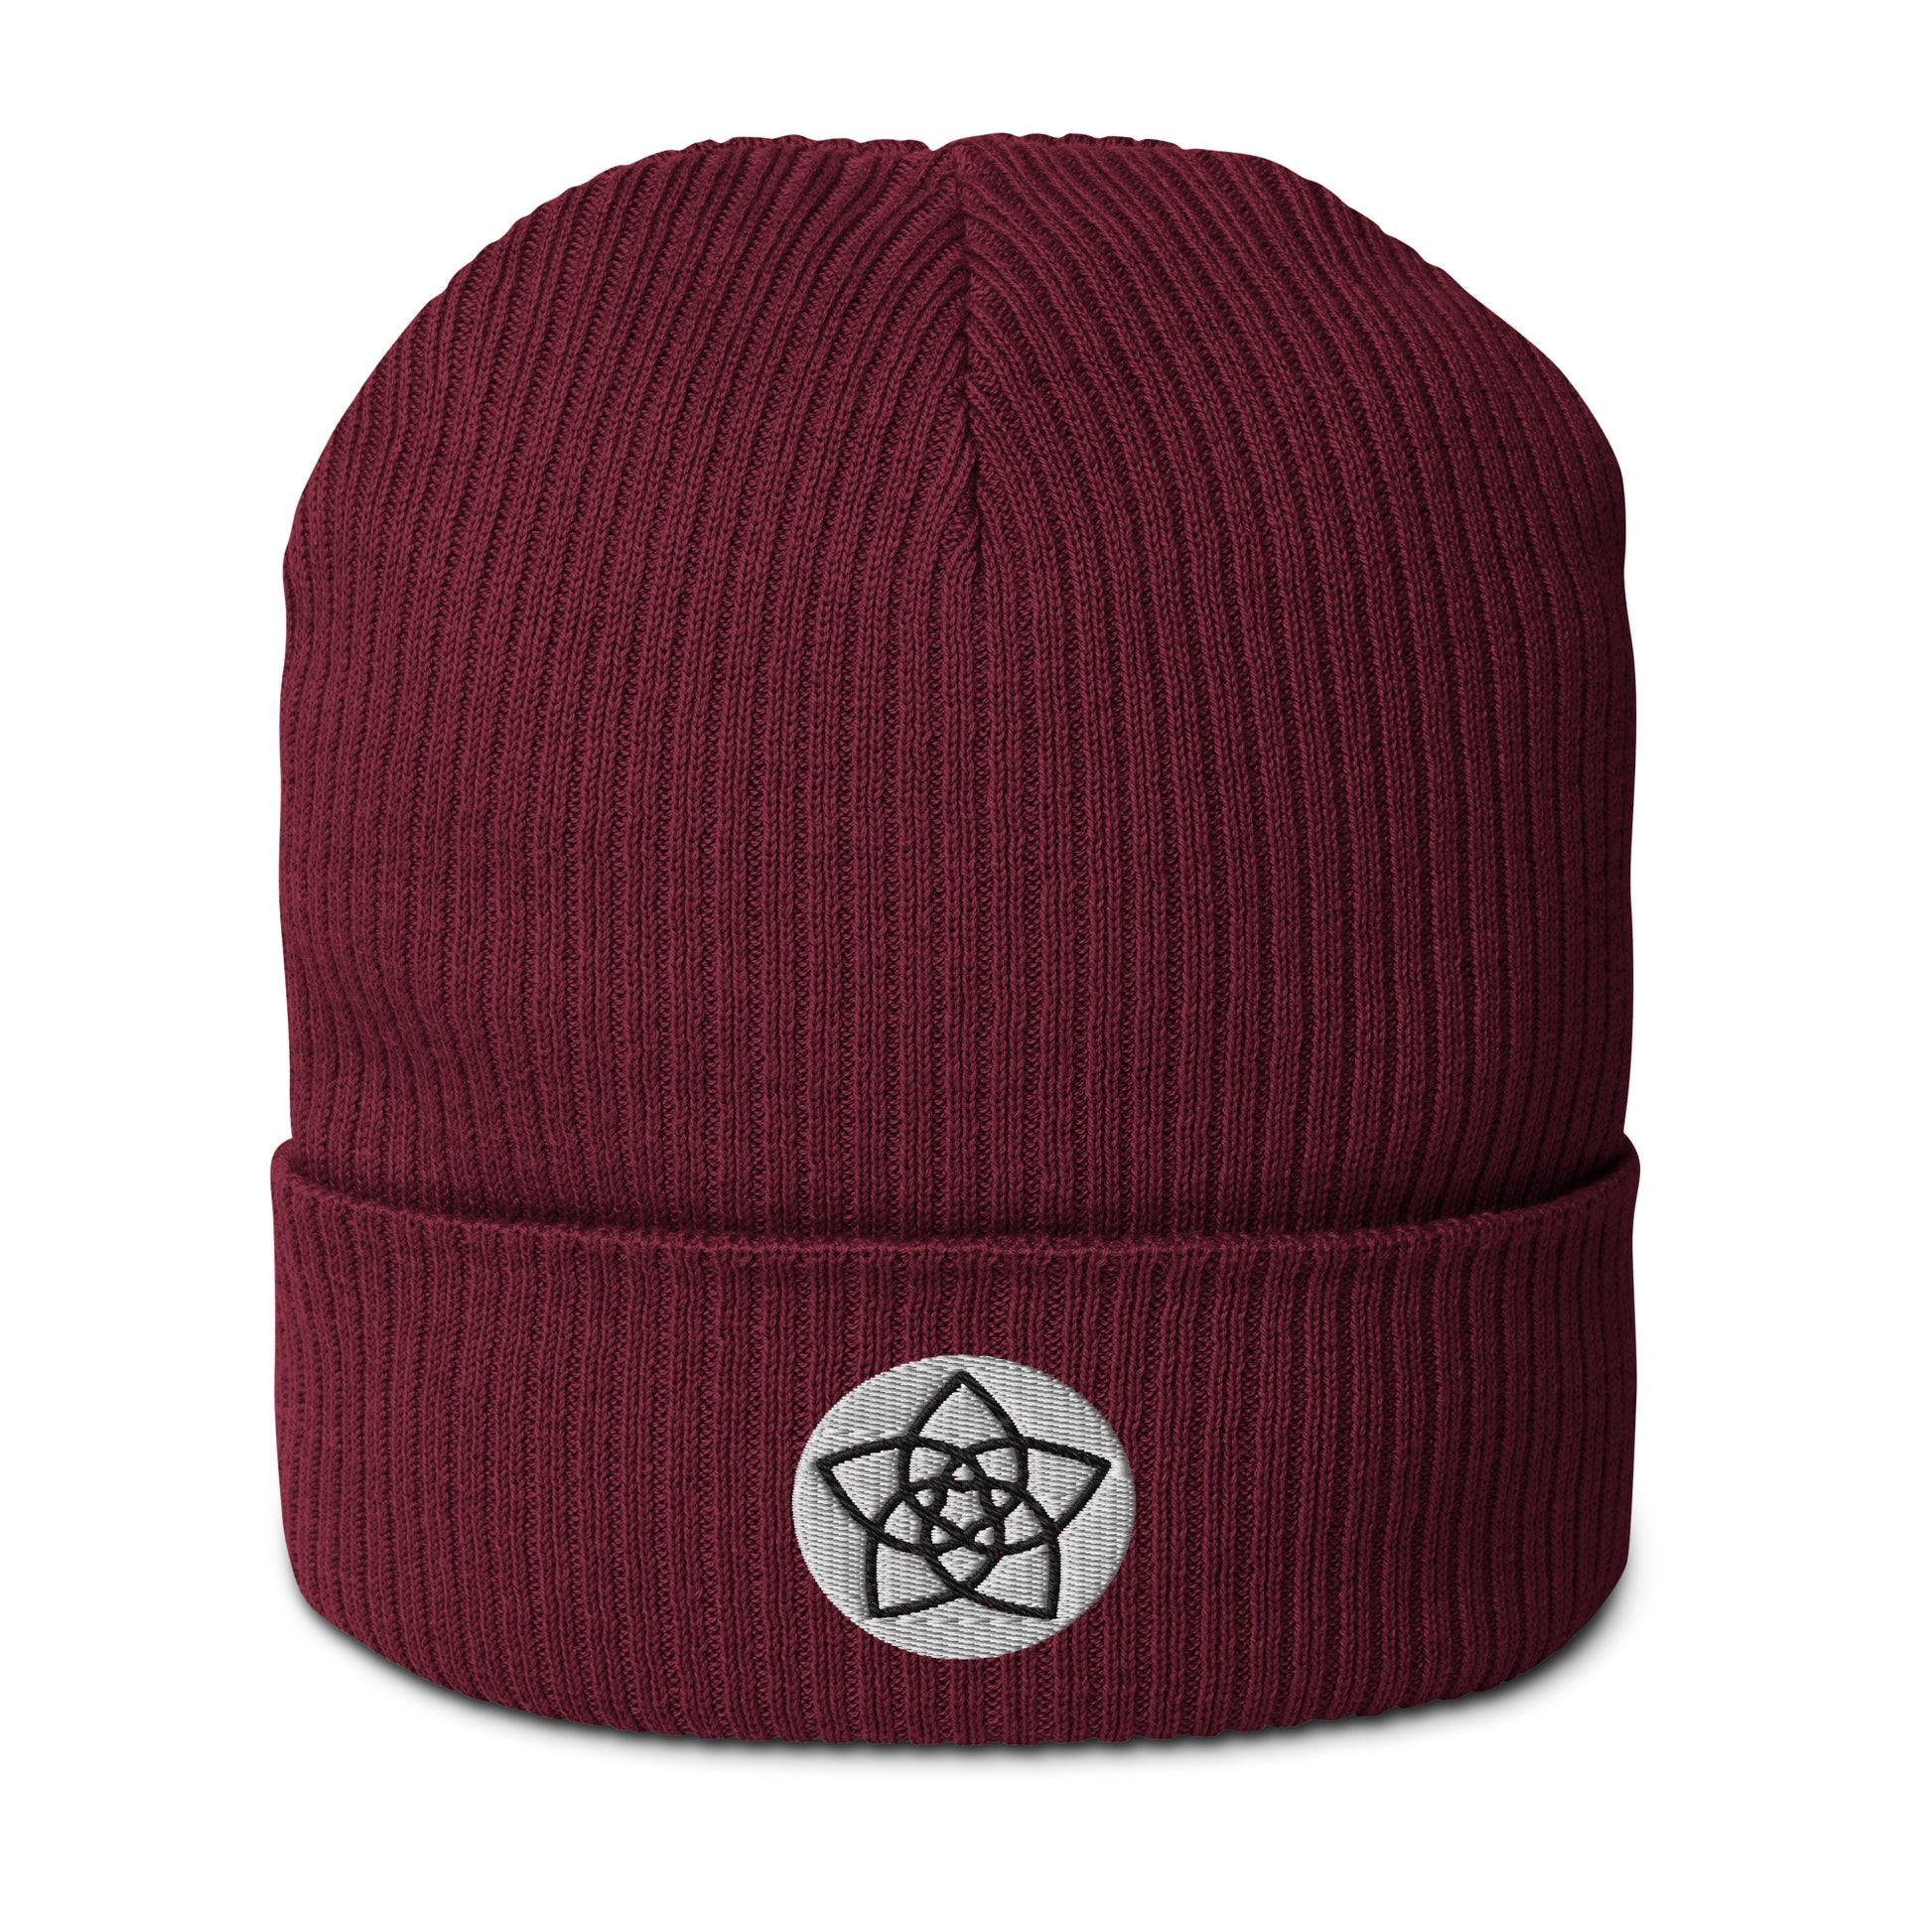 Tune into your inner goddess with our Venus Flower Organic Cotton Beanie in Wine Red. Crafted from organic cotton and embroidered with the Venus Flower symbol, this beanie is a tribute to the divine feminine, blooming with unity, balance, and celestial connections. Plus, it's made with breathable, lightweight fabric and natural materials, ensuring you feel as light as a petal while you're on your celestial journey. Snatch one of these beanies and infuse your style with a touch of Venusian magic.